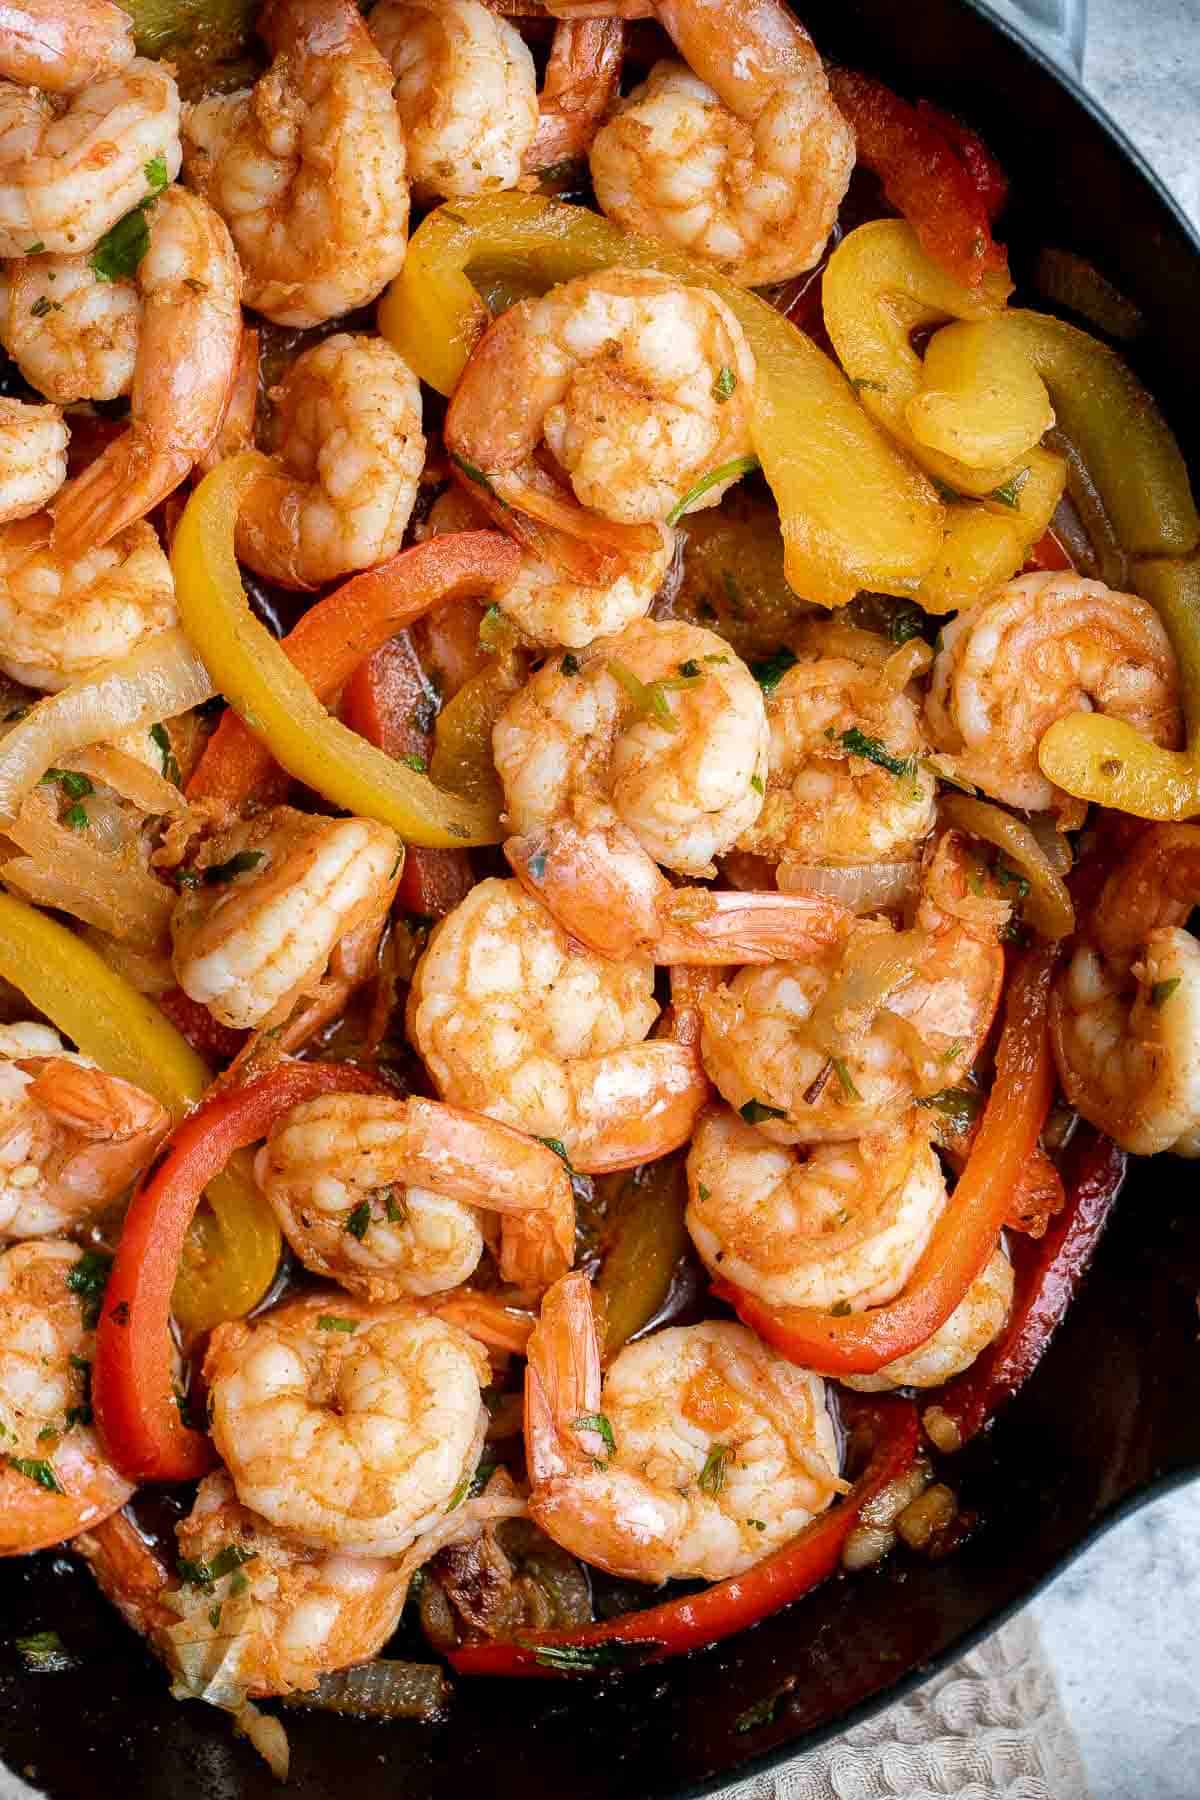 Shrimp fajitas are healthy, flavorful, and delicious. This one skillet recipe is loaded with shrimp and vegetables and is ready in just 20 minutes. | aheadofthyme.com